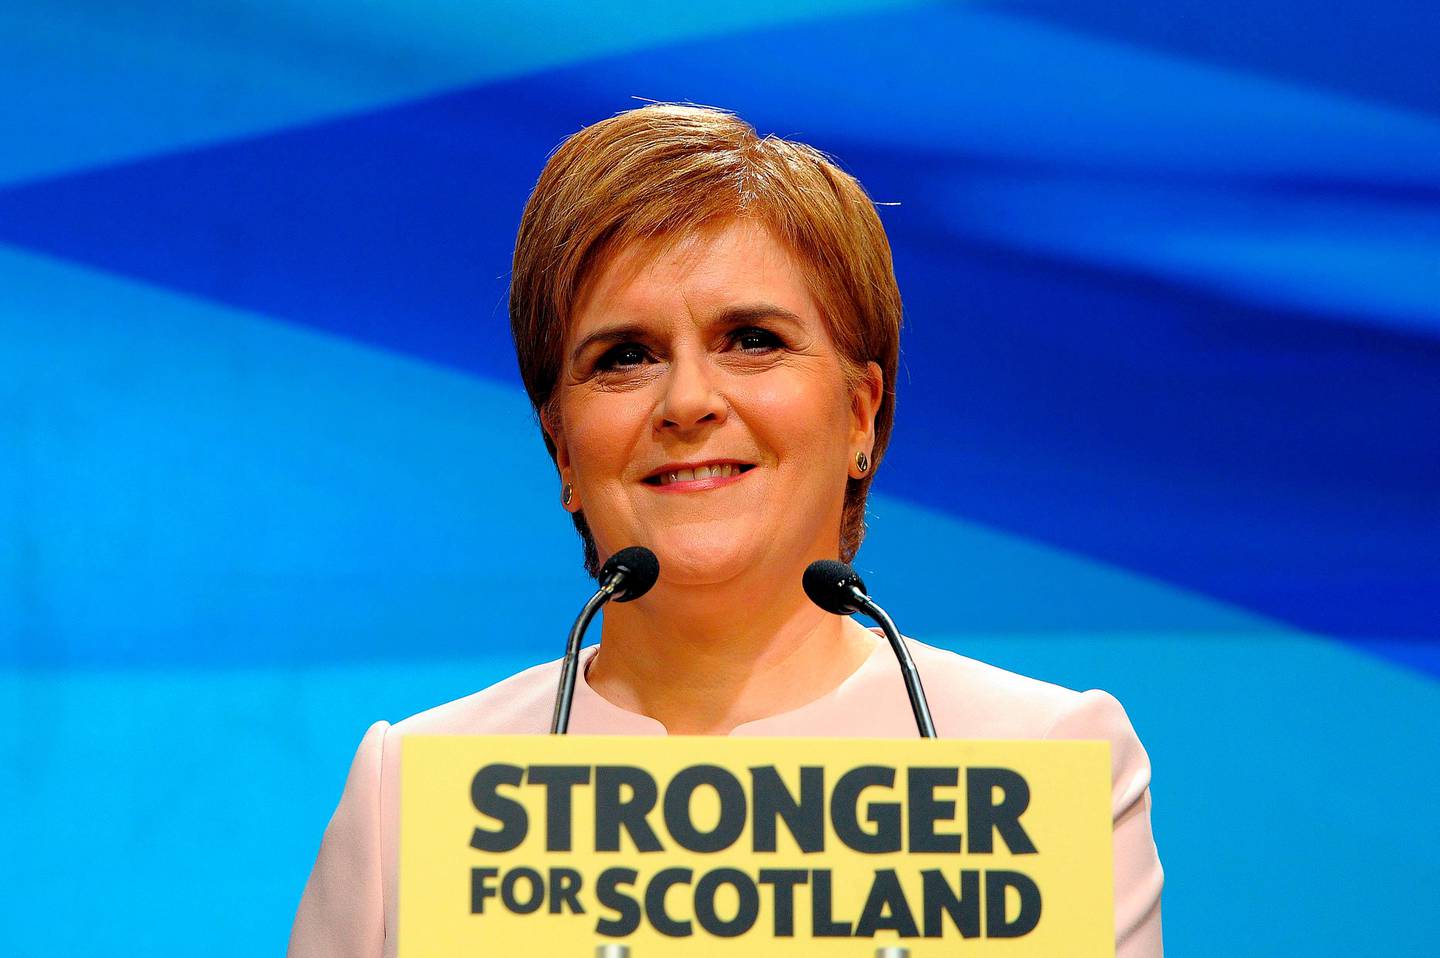 Scotland's First Minister Nicola Sturgeon delivers her keynote speech on the second day of the Scottish National Party (SNP) annual conference in Aberdeen, Scotland on June 9, 2018.  / AFP PHOTO / Andy Buchanan